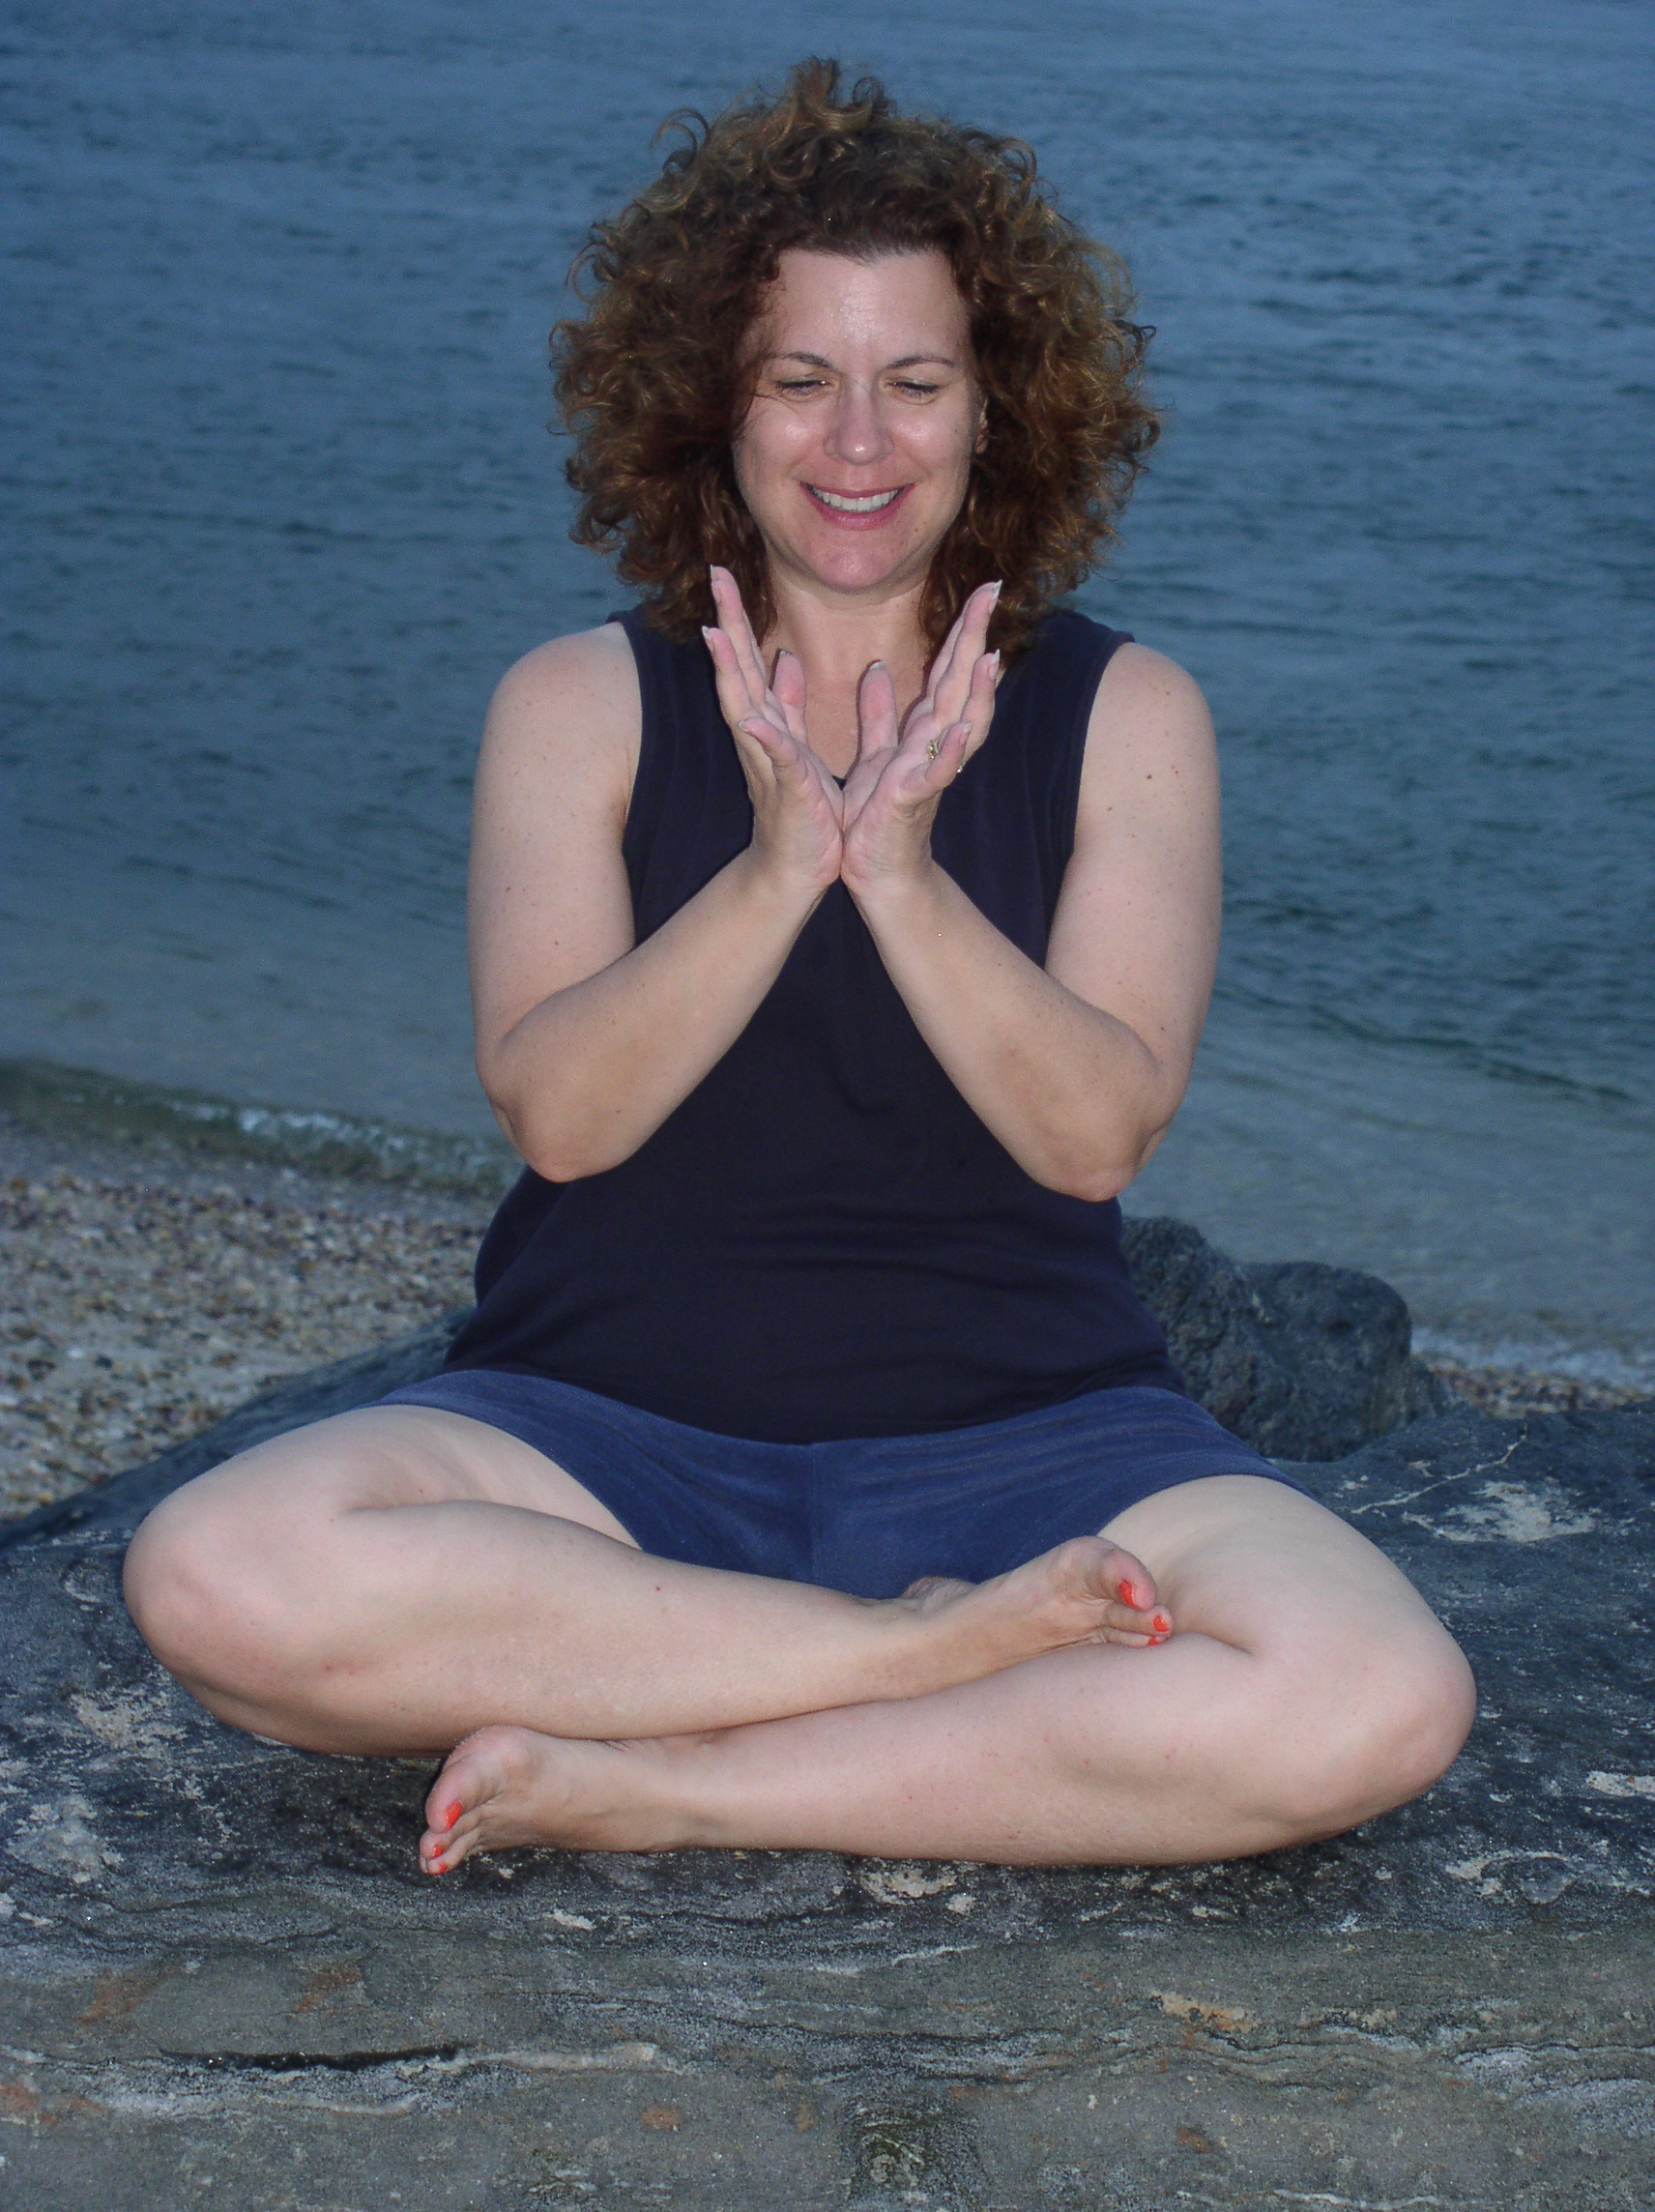 Image of Louise Fecher in a yoga pose by the ocean